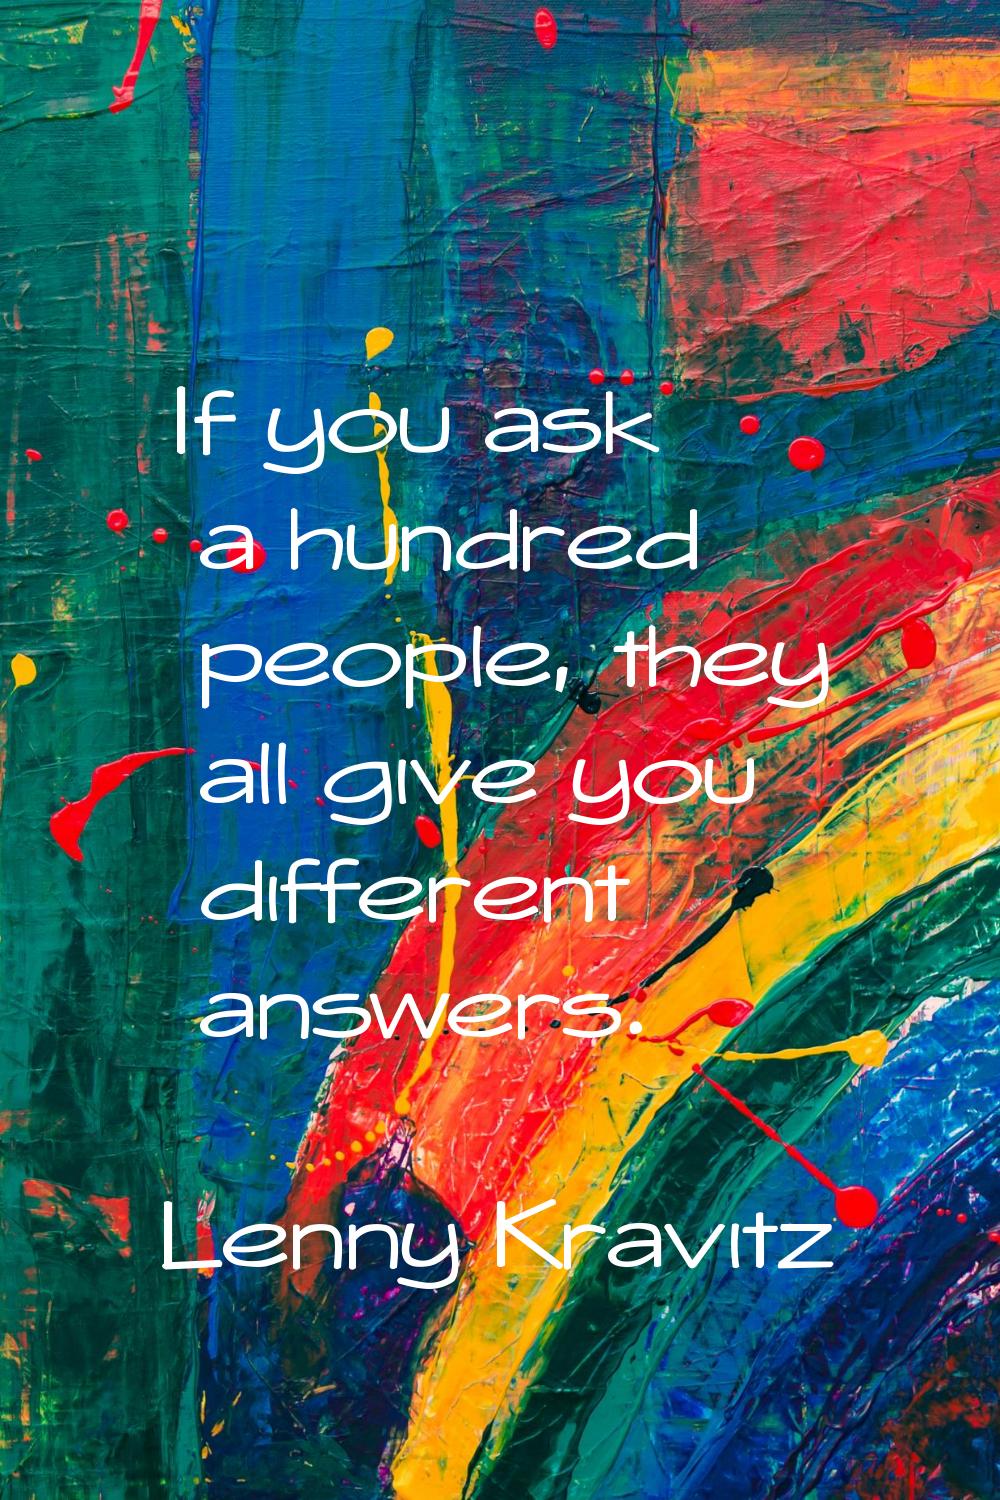 If you ask a hundred people, they all give you different answers.